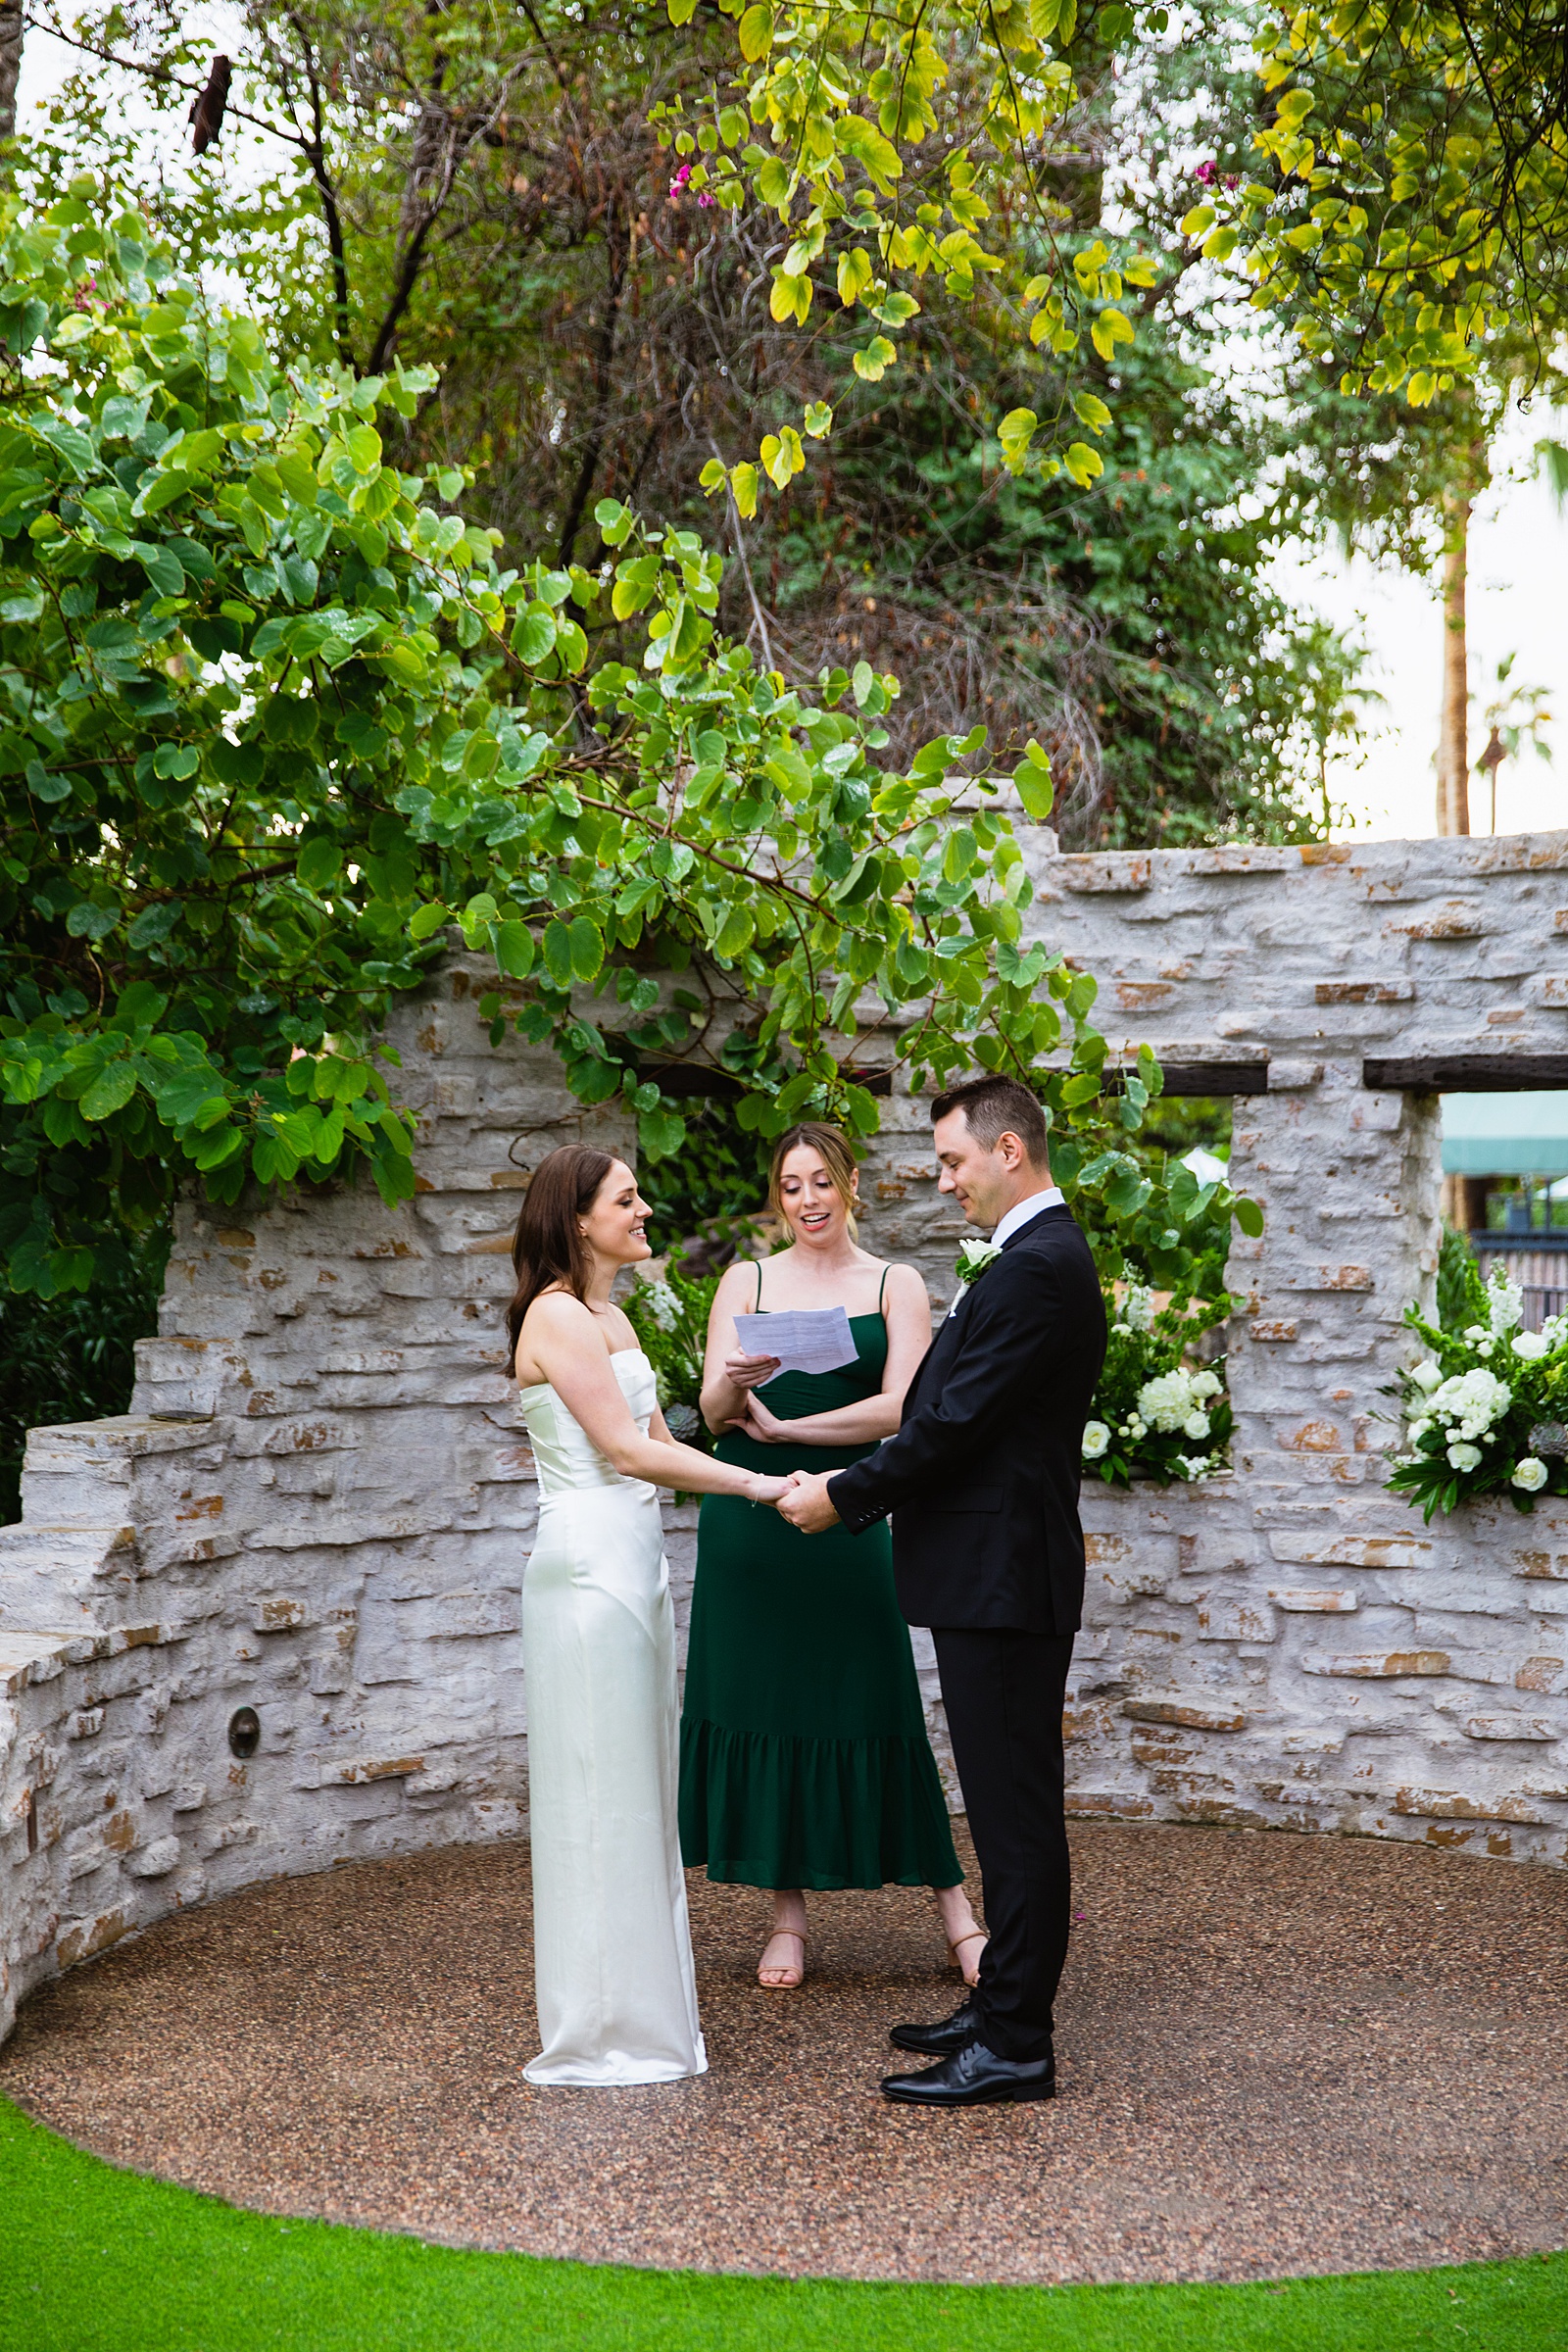 Bride & Groom exchange vows during their The Scott wedding ceremony by Scottsdale wedding photographer PMA Photography.